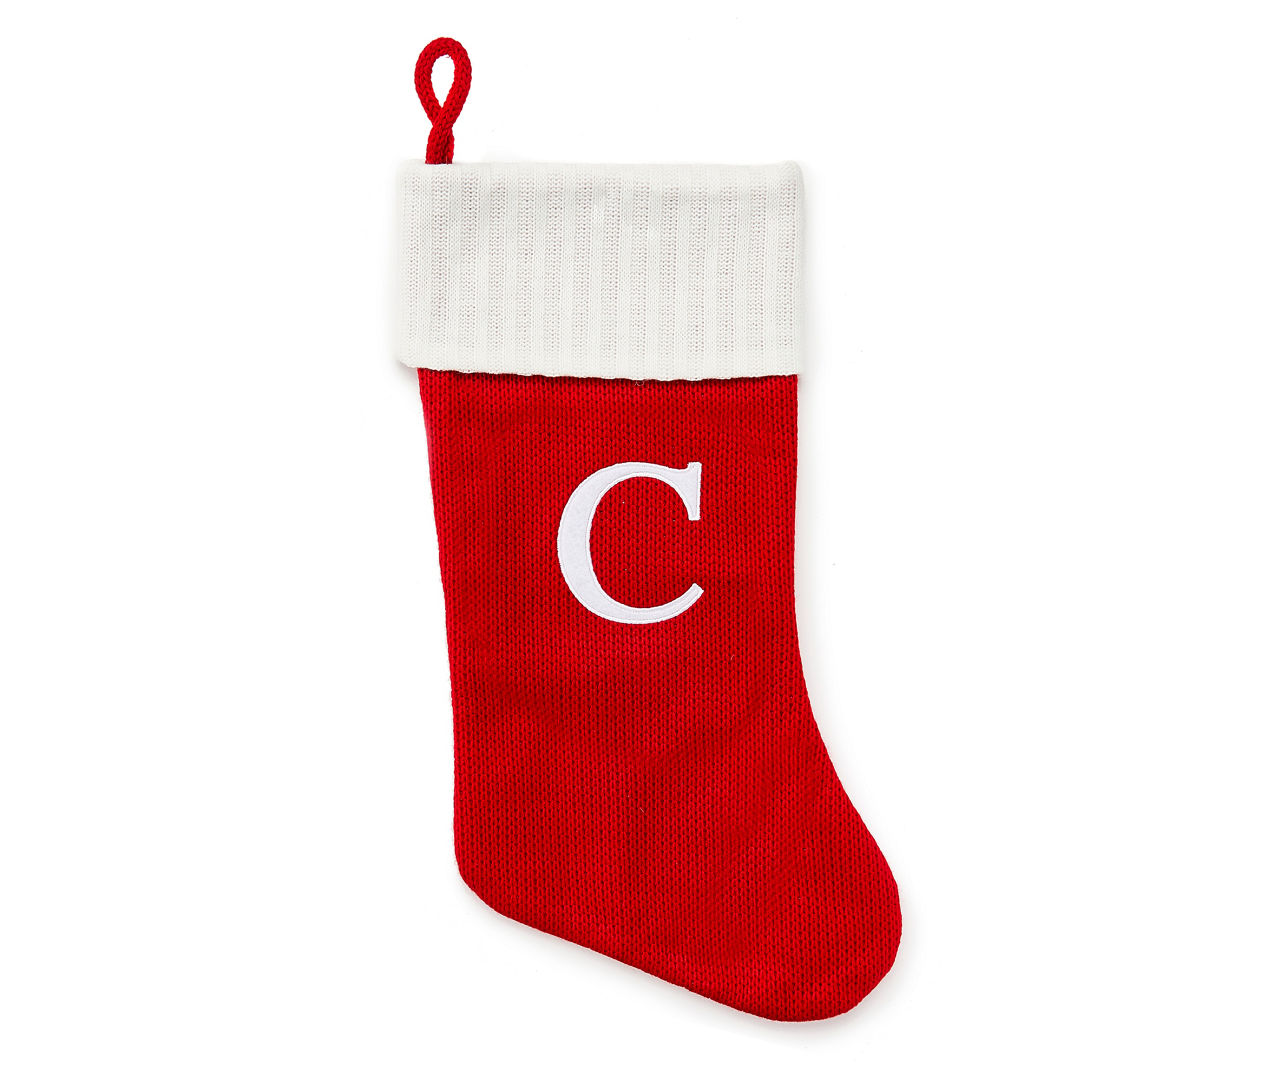 KNIT INITIAL STOCKING LETTER C